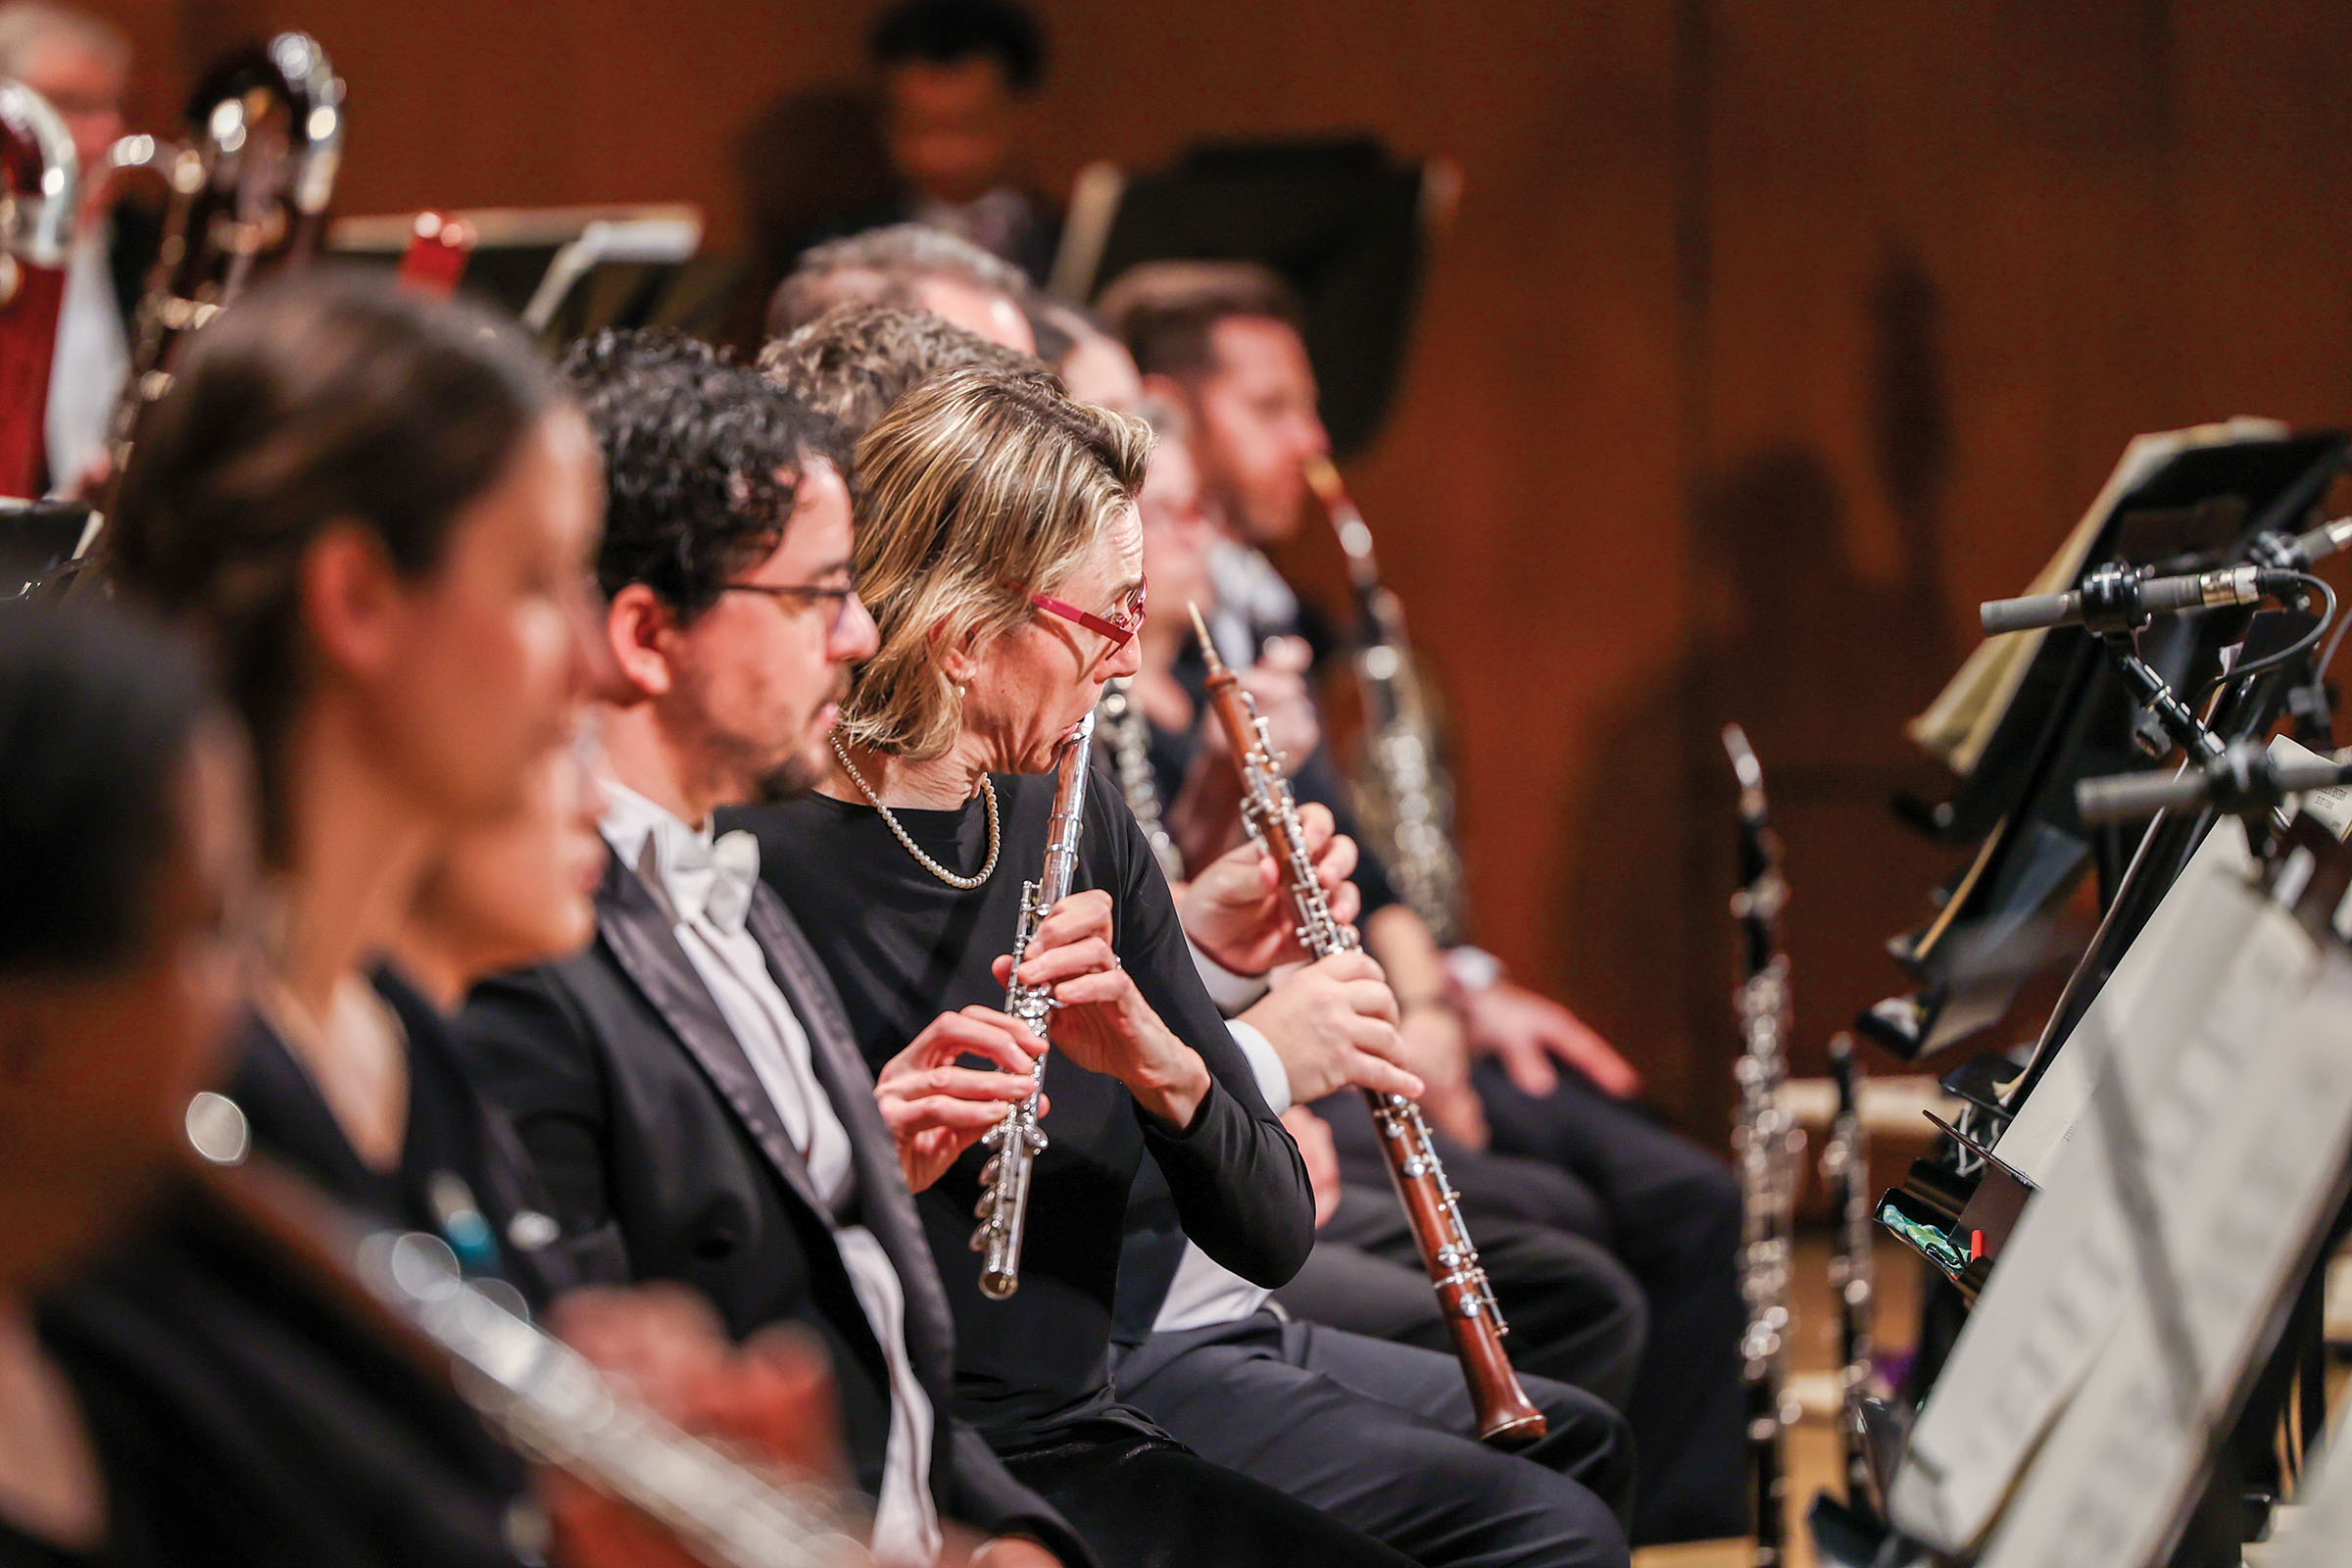 A group of performers play woodwind instruments like clarinet, bassoon, and flute